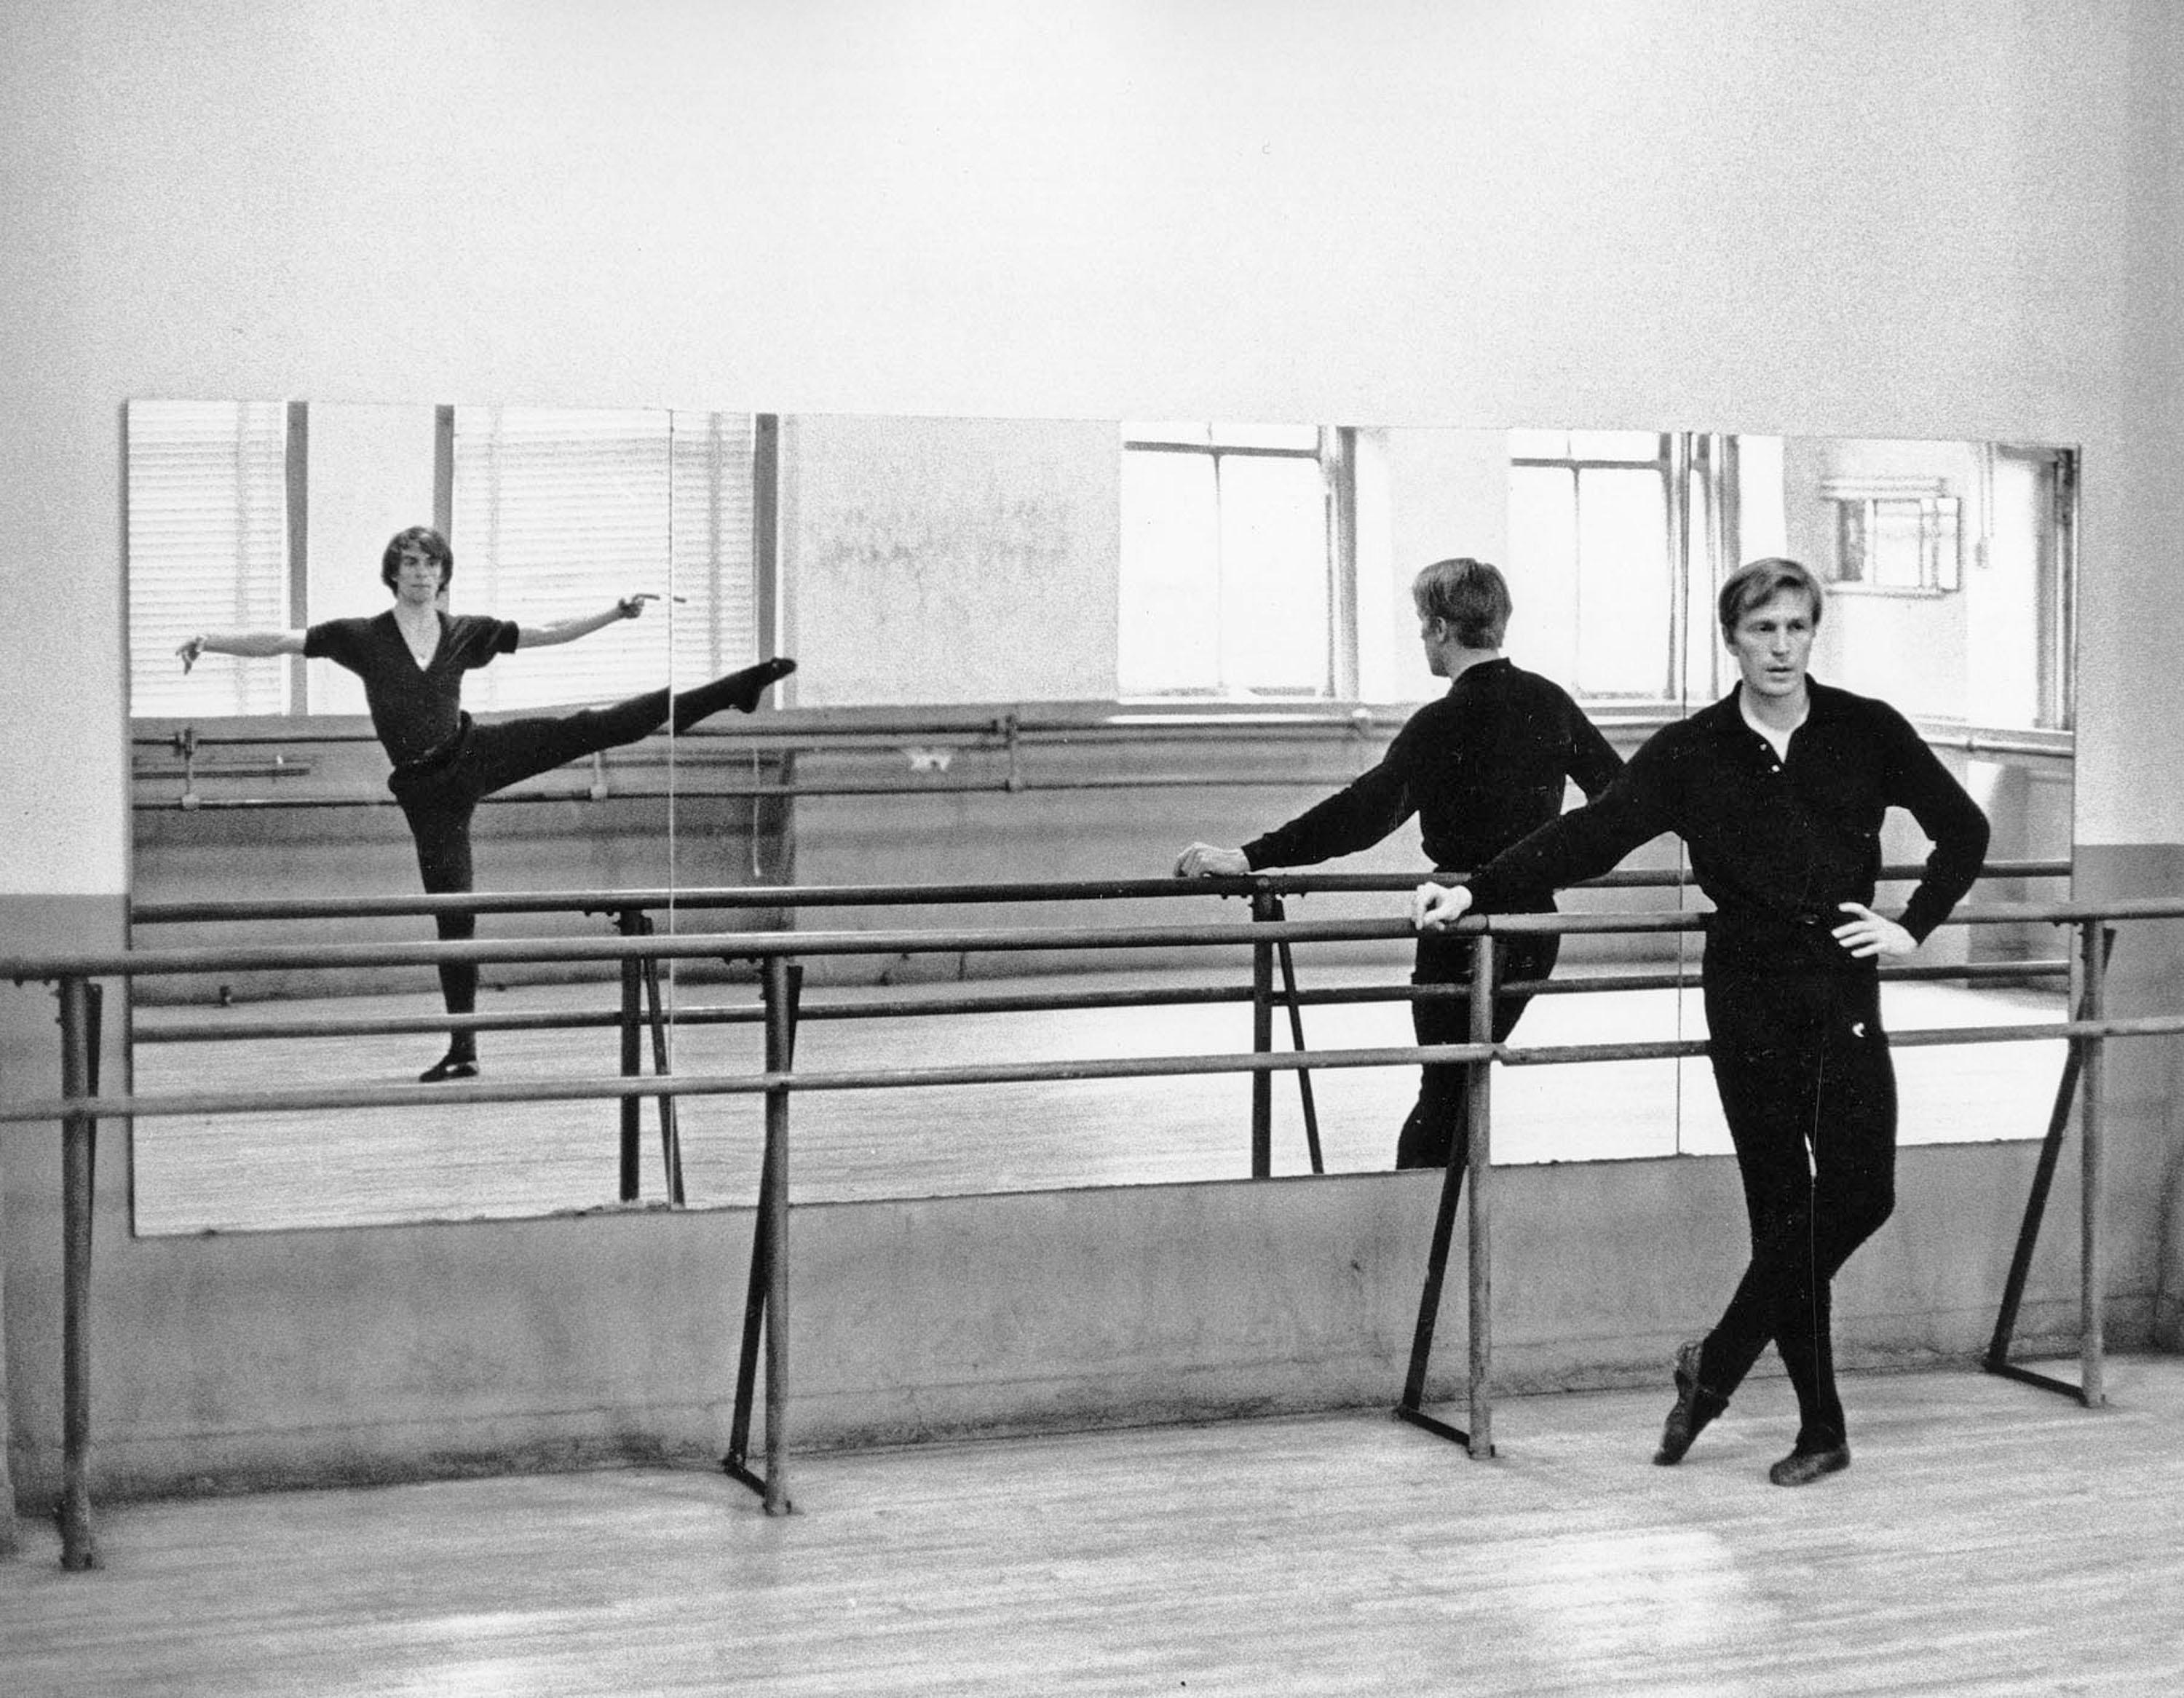 Jack Mitchell Black and White Photograph - Rudolf Nureyev and Erik Bruhn rehearsing in NYC